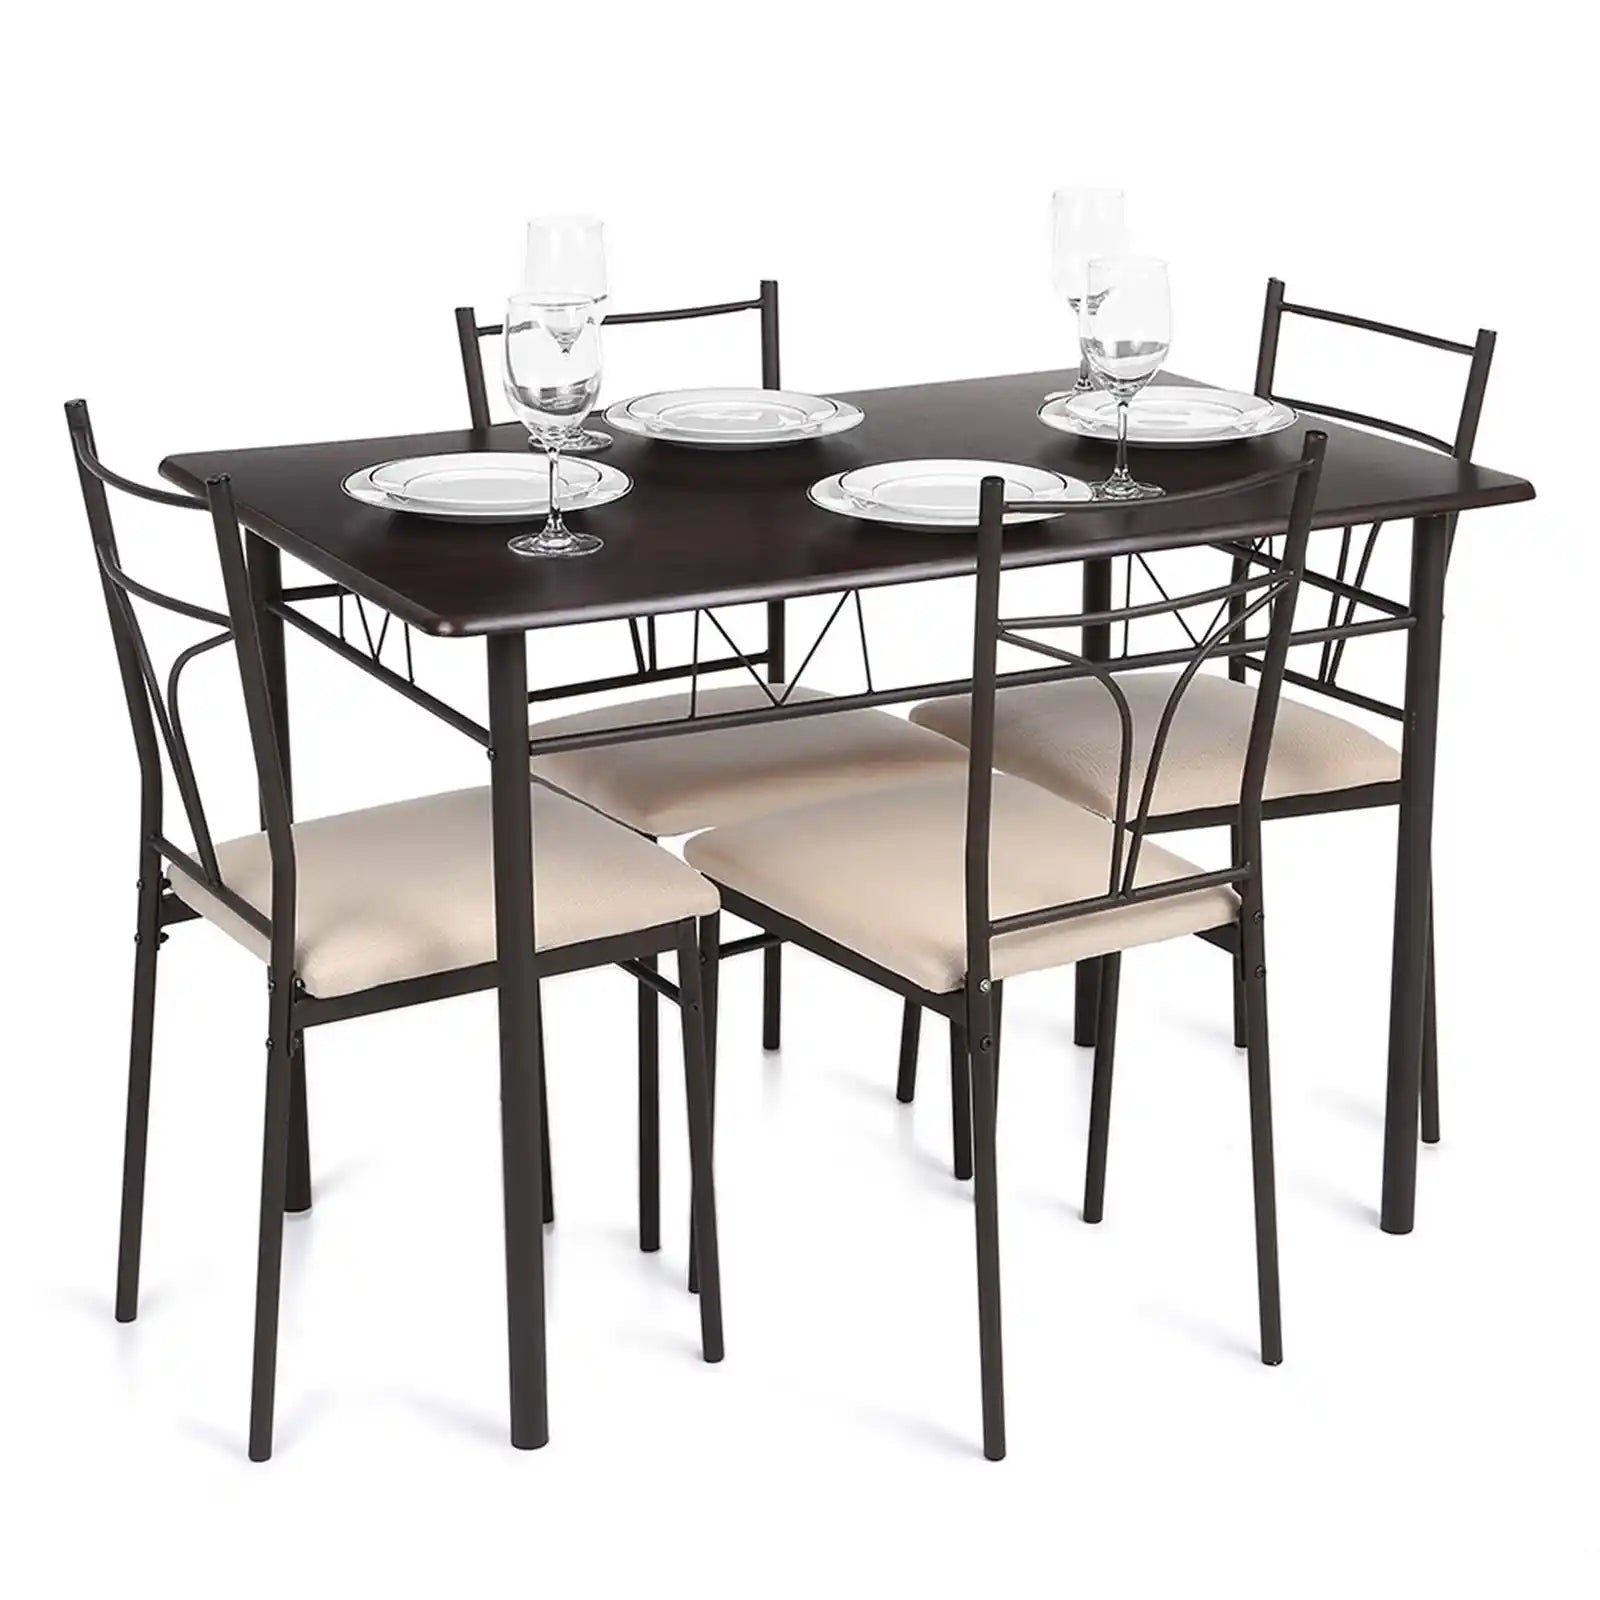 5 Pieces Dining Set Metal Frame Dining Kitchen Table with 4 Chairs